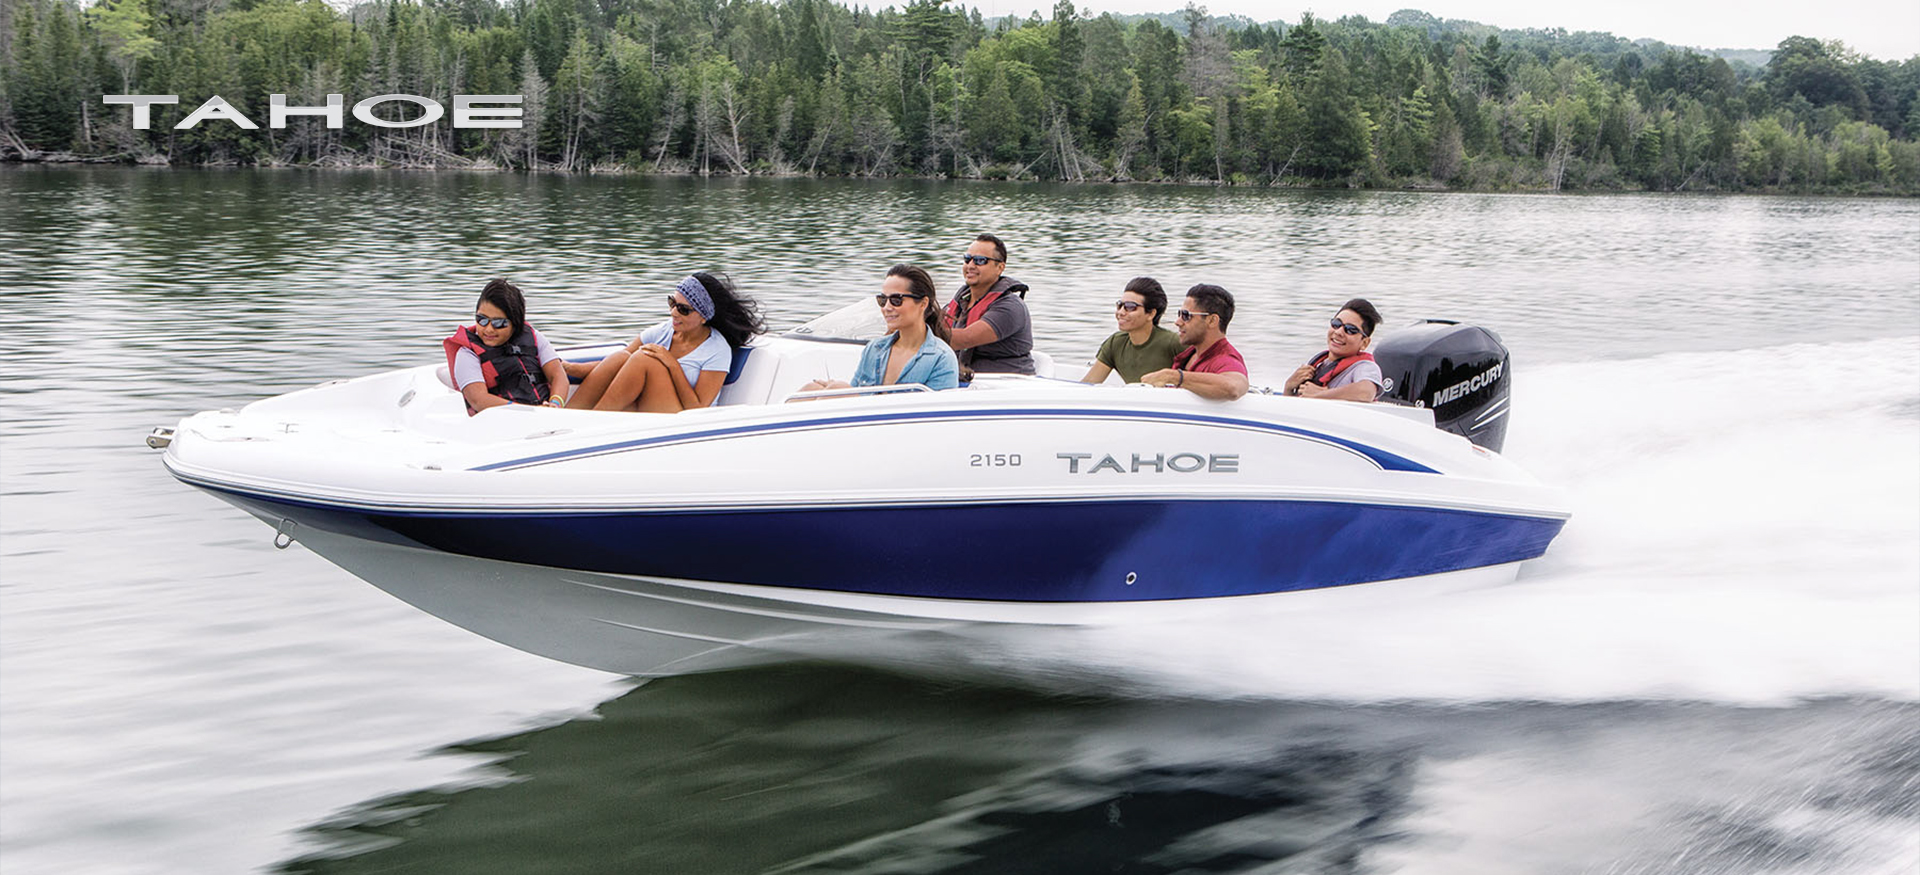 Tahoe 2150 family boating